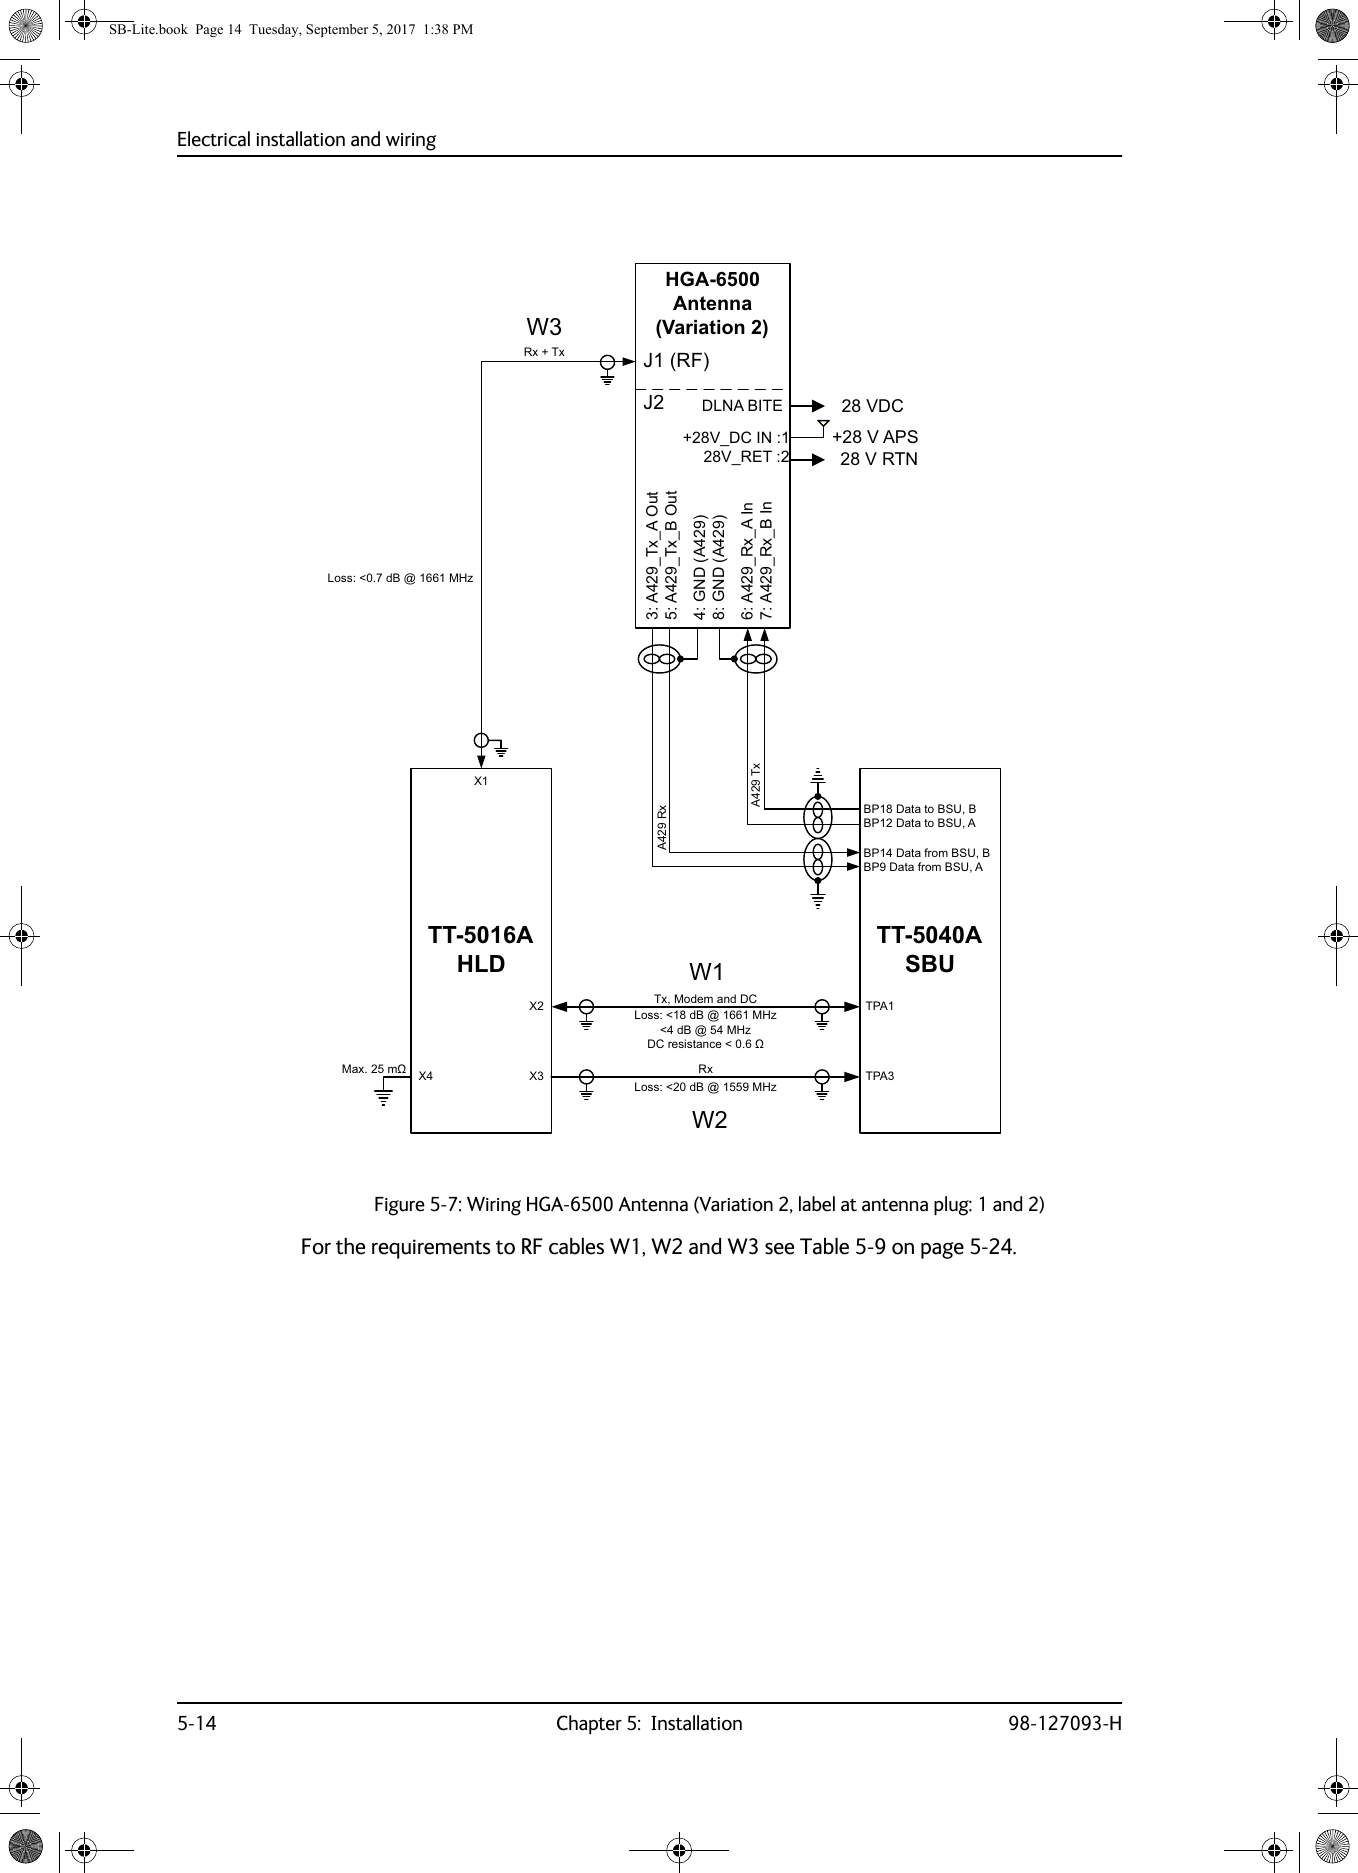 Electrical installation and wiring5-14 Chapter 5:  Installation 98-127093-HFor the requirements to RF cables W1, W2 and W3 see Table  5-9 on page  5-24.Figure 5-7:  Wiring HGA-6500 Antenna (Variation 2, label at antenna plug: 1 and 2)/RVVG%#0+]G%#0+]&apos;&amp;UHVLVWDQFHȍ:::77$+/&apos;+*$$QWHQQD9DULDWLRQ;77$6%8$7[$5[73$73$;;7[0RGHPDQG&apos;&amp;5[5[7[-5)9$36$B7[B$2XW$B7[B%2XW*1&apos;$*1&apos;$$B5[B$,Q$B5[B%,Q9B&apos;&amp;,19B5(7-95710D[Pȍ ;/RVVG%#0+]/RVVG%#0+]%3&apos;DWDWR%68%%3&apos;DWDWR%68$%3&apos;DWDIURP%68%%3&apos;DWDIURP%68$9&apos;&amp;&apos;/1$%,7(SB-Lite.book  Page 14  Tuesday, September 5, 2017  1:38 PM